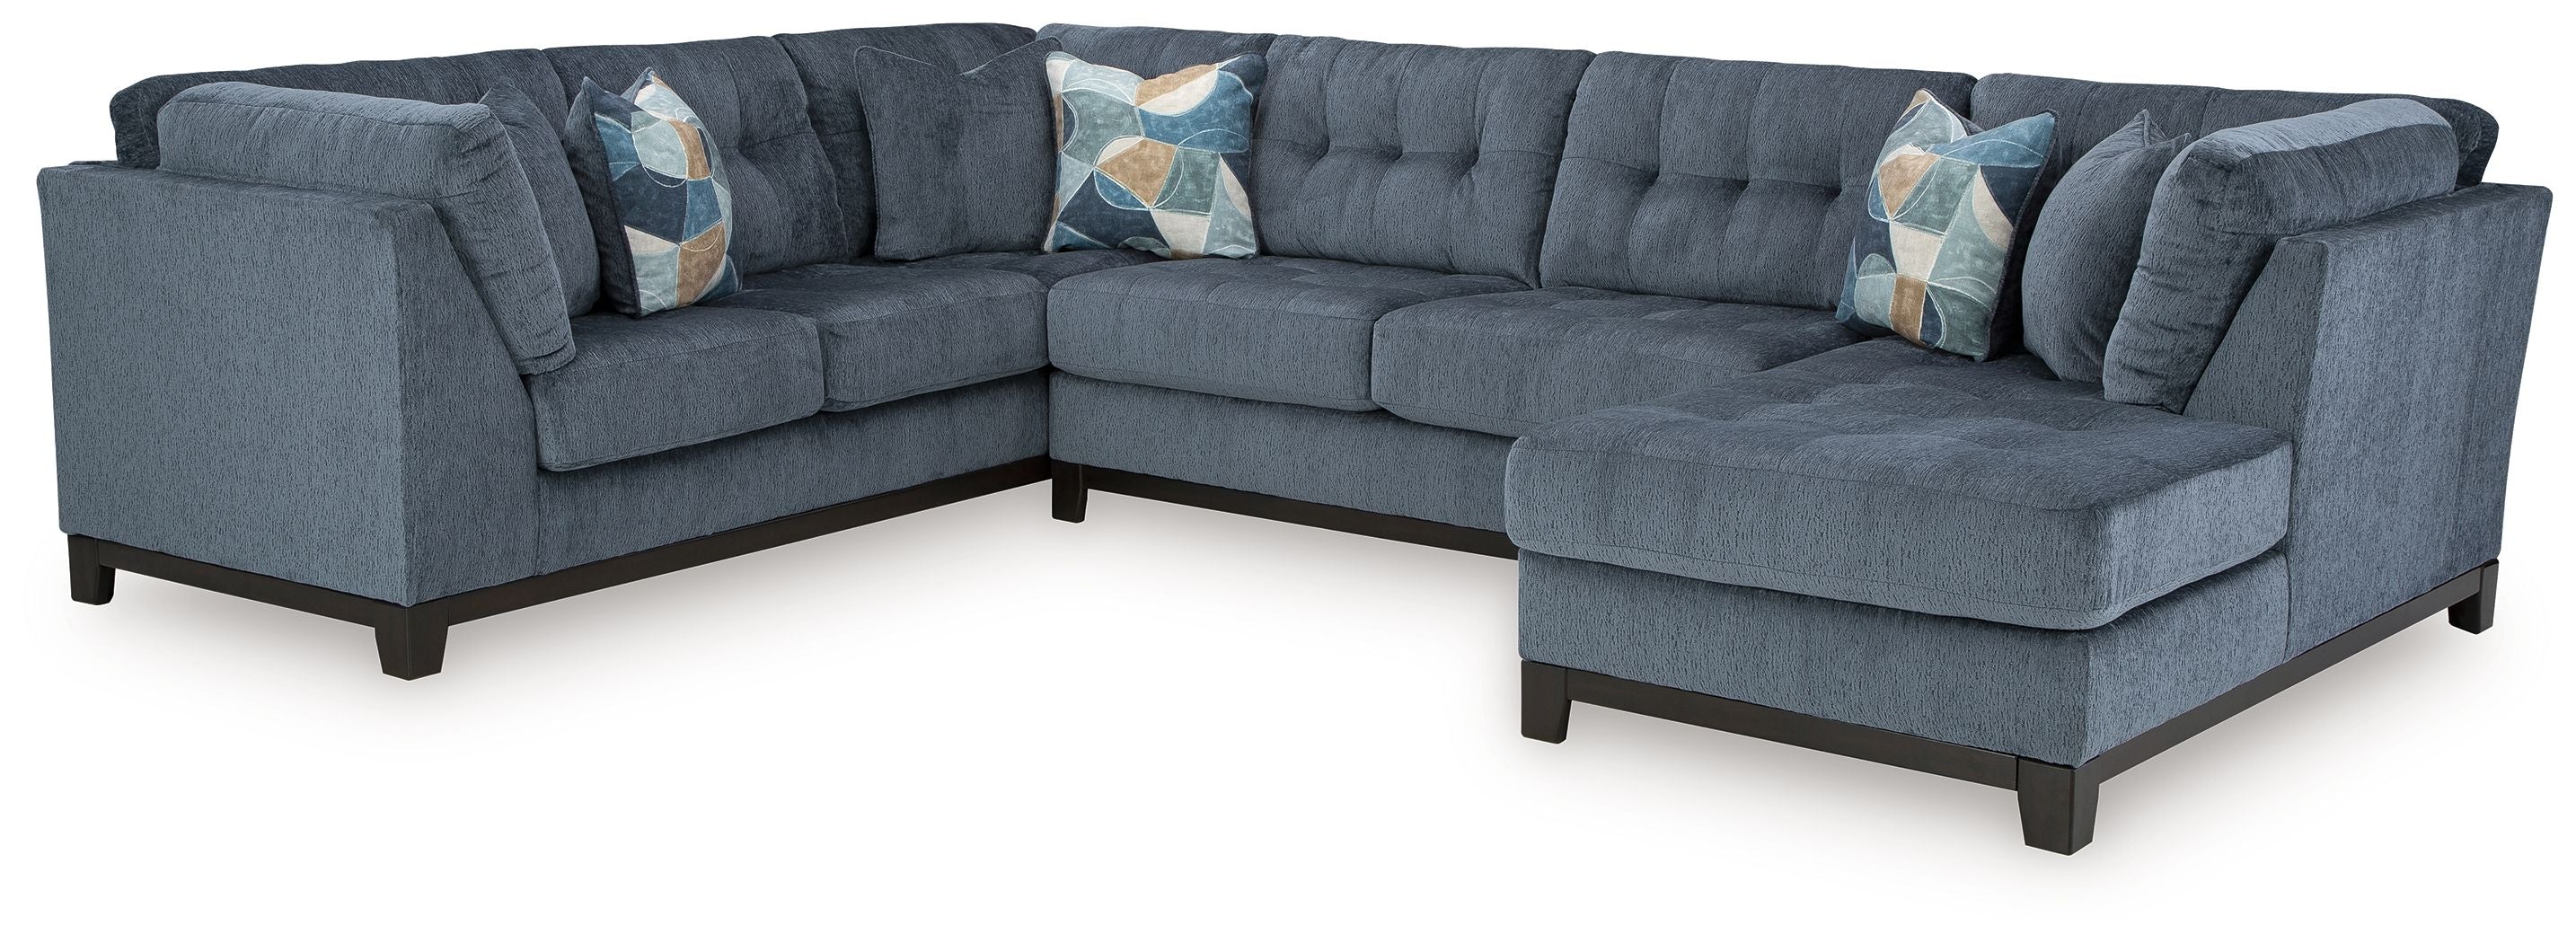 blue u shaped sectional couch